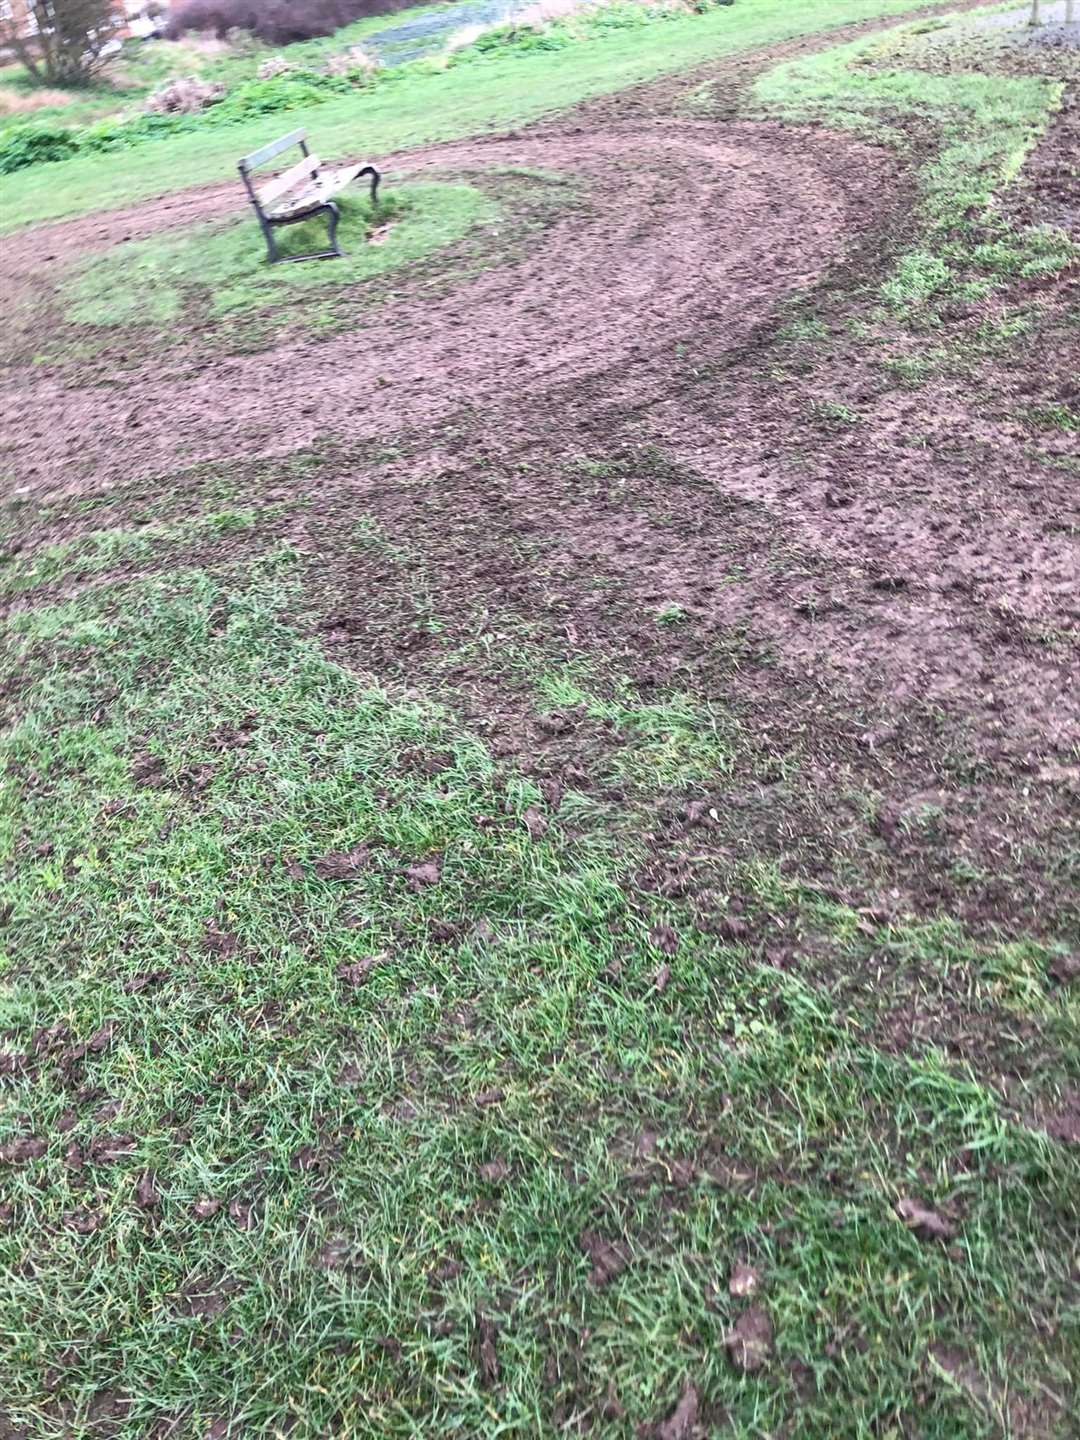 Dane Valley Road Park play area in Margate was turned to mud by motorbike riders